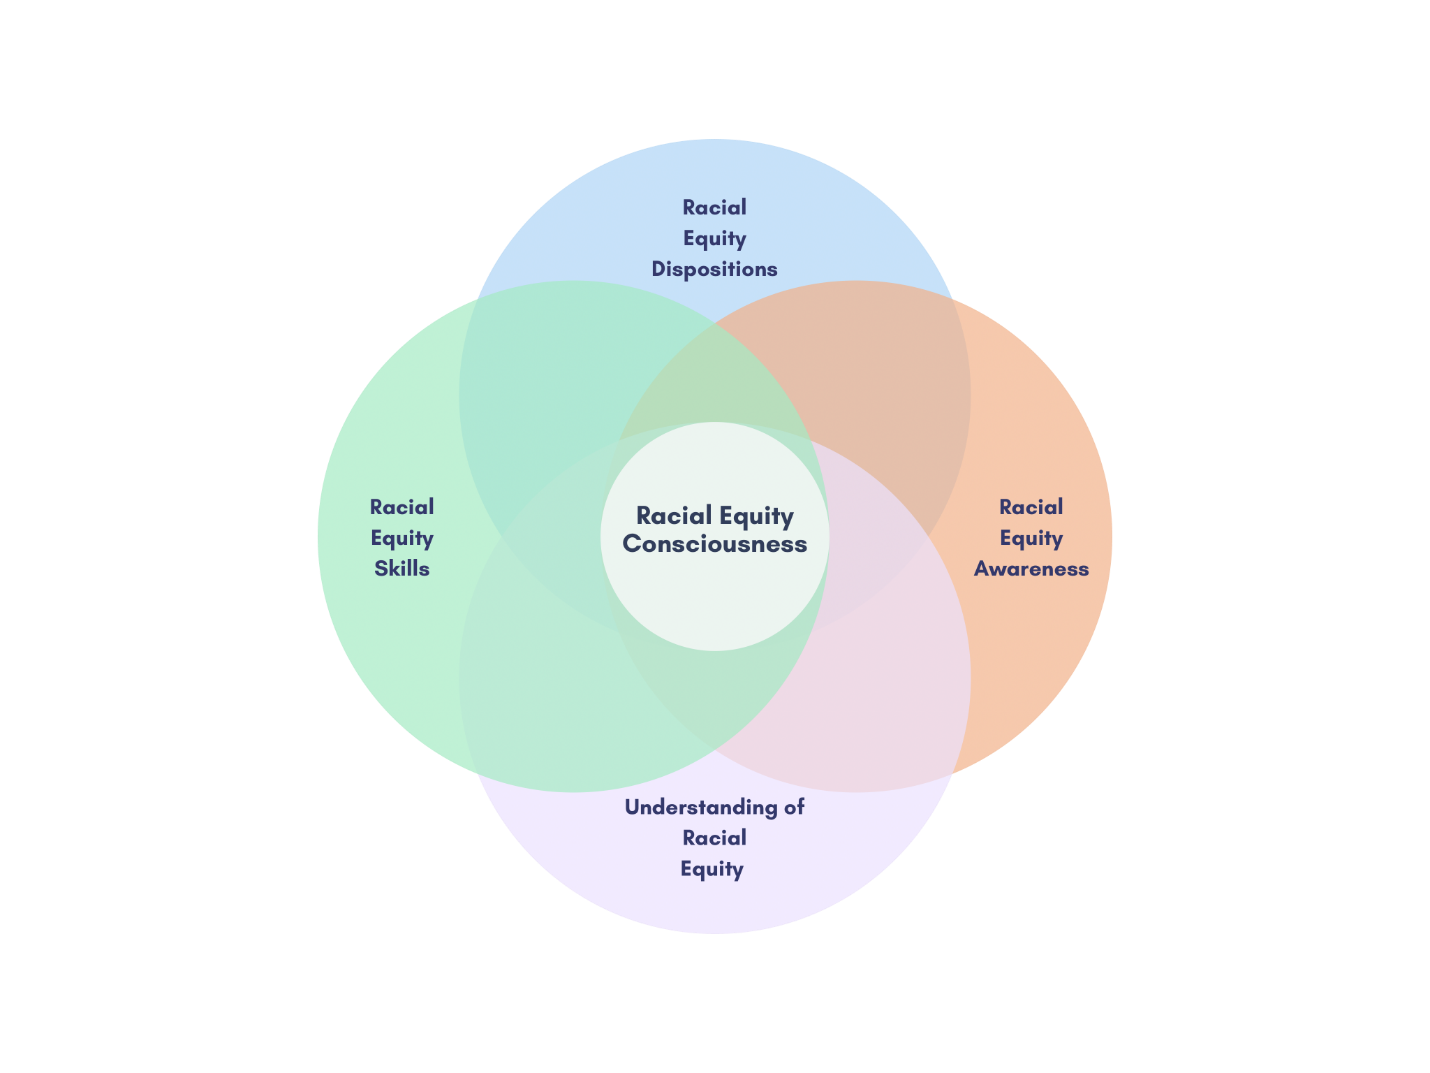 Racial equity consciousness consists of four interrelated components: racial equity dispositions, understanding of racial equity, racial equity awareness, and racial equity skills. 